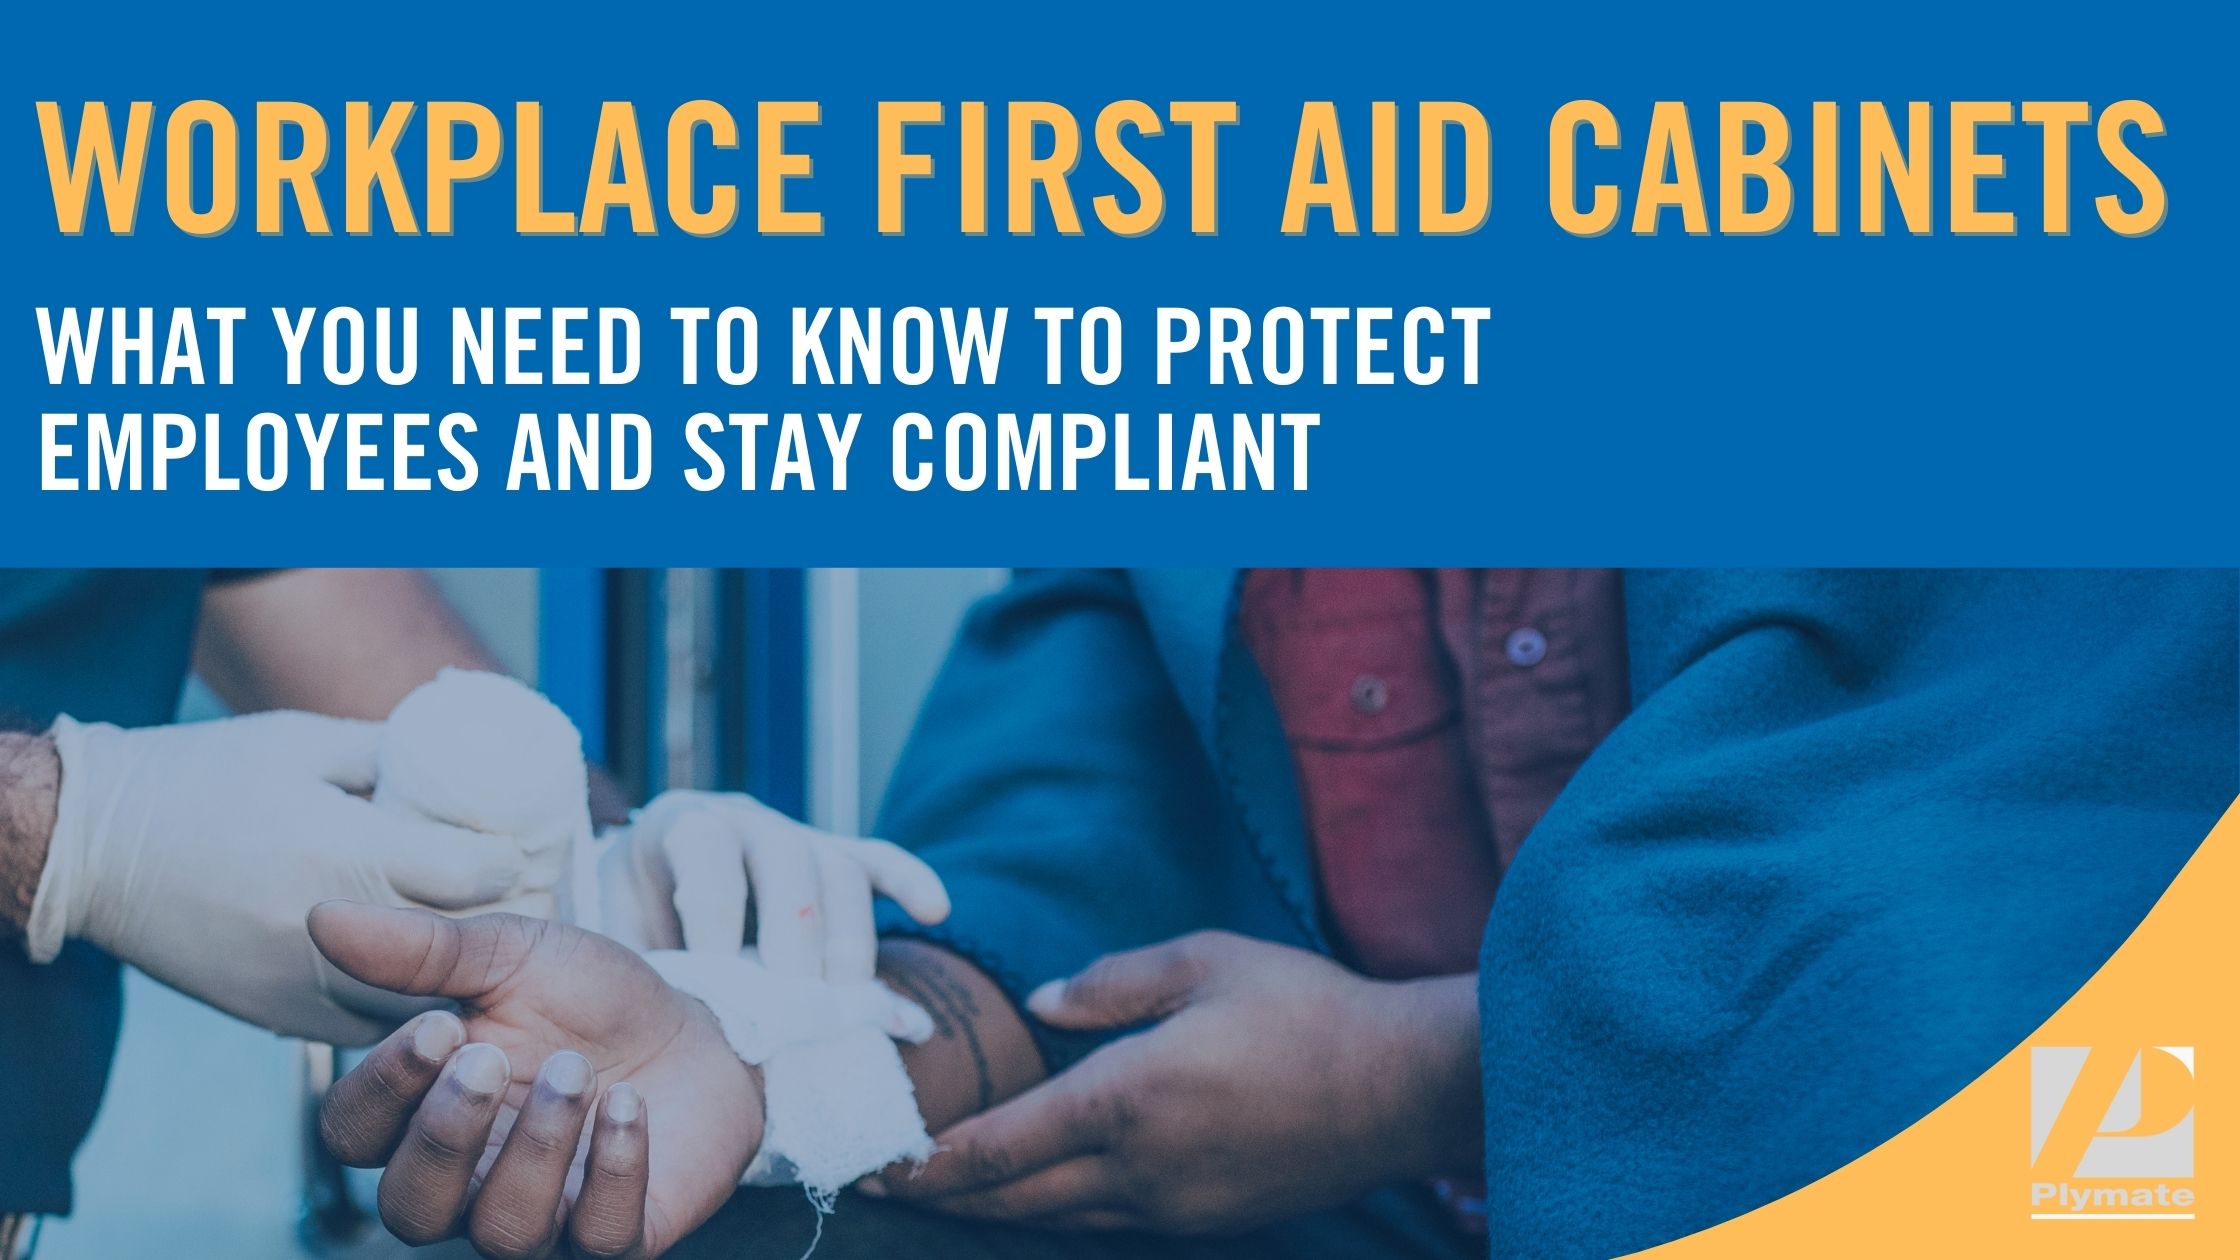 Workplace First Aid Cabinets – What You Need to Know to Protect Employees and Stay Compliant